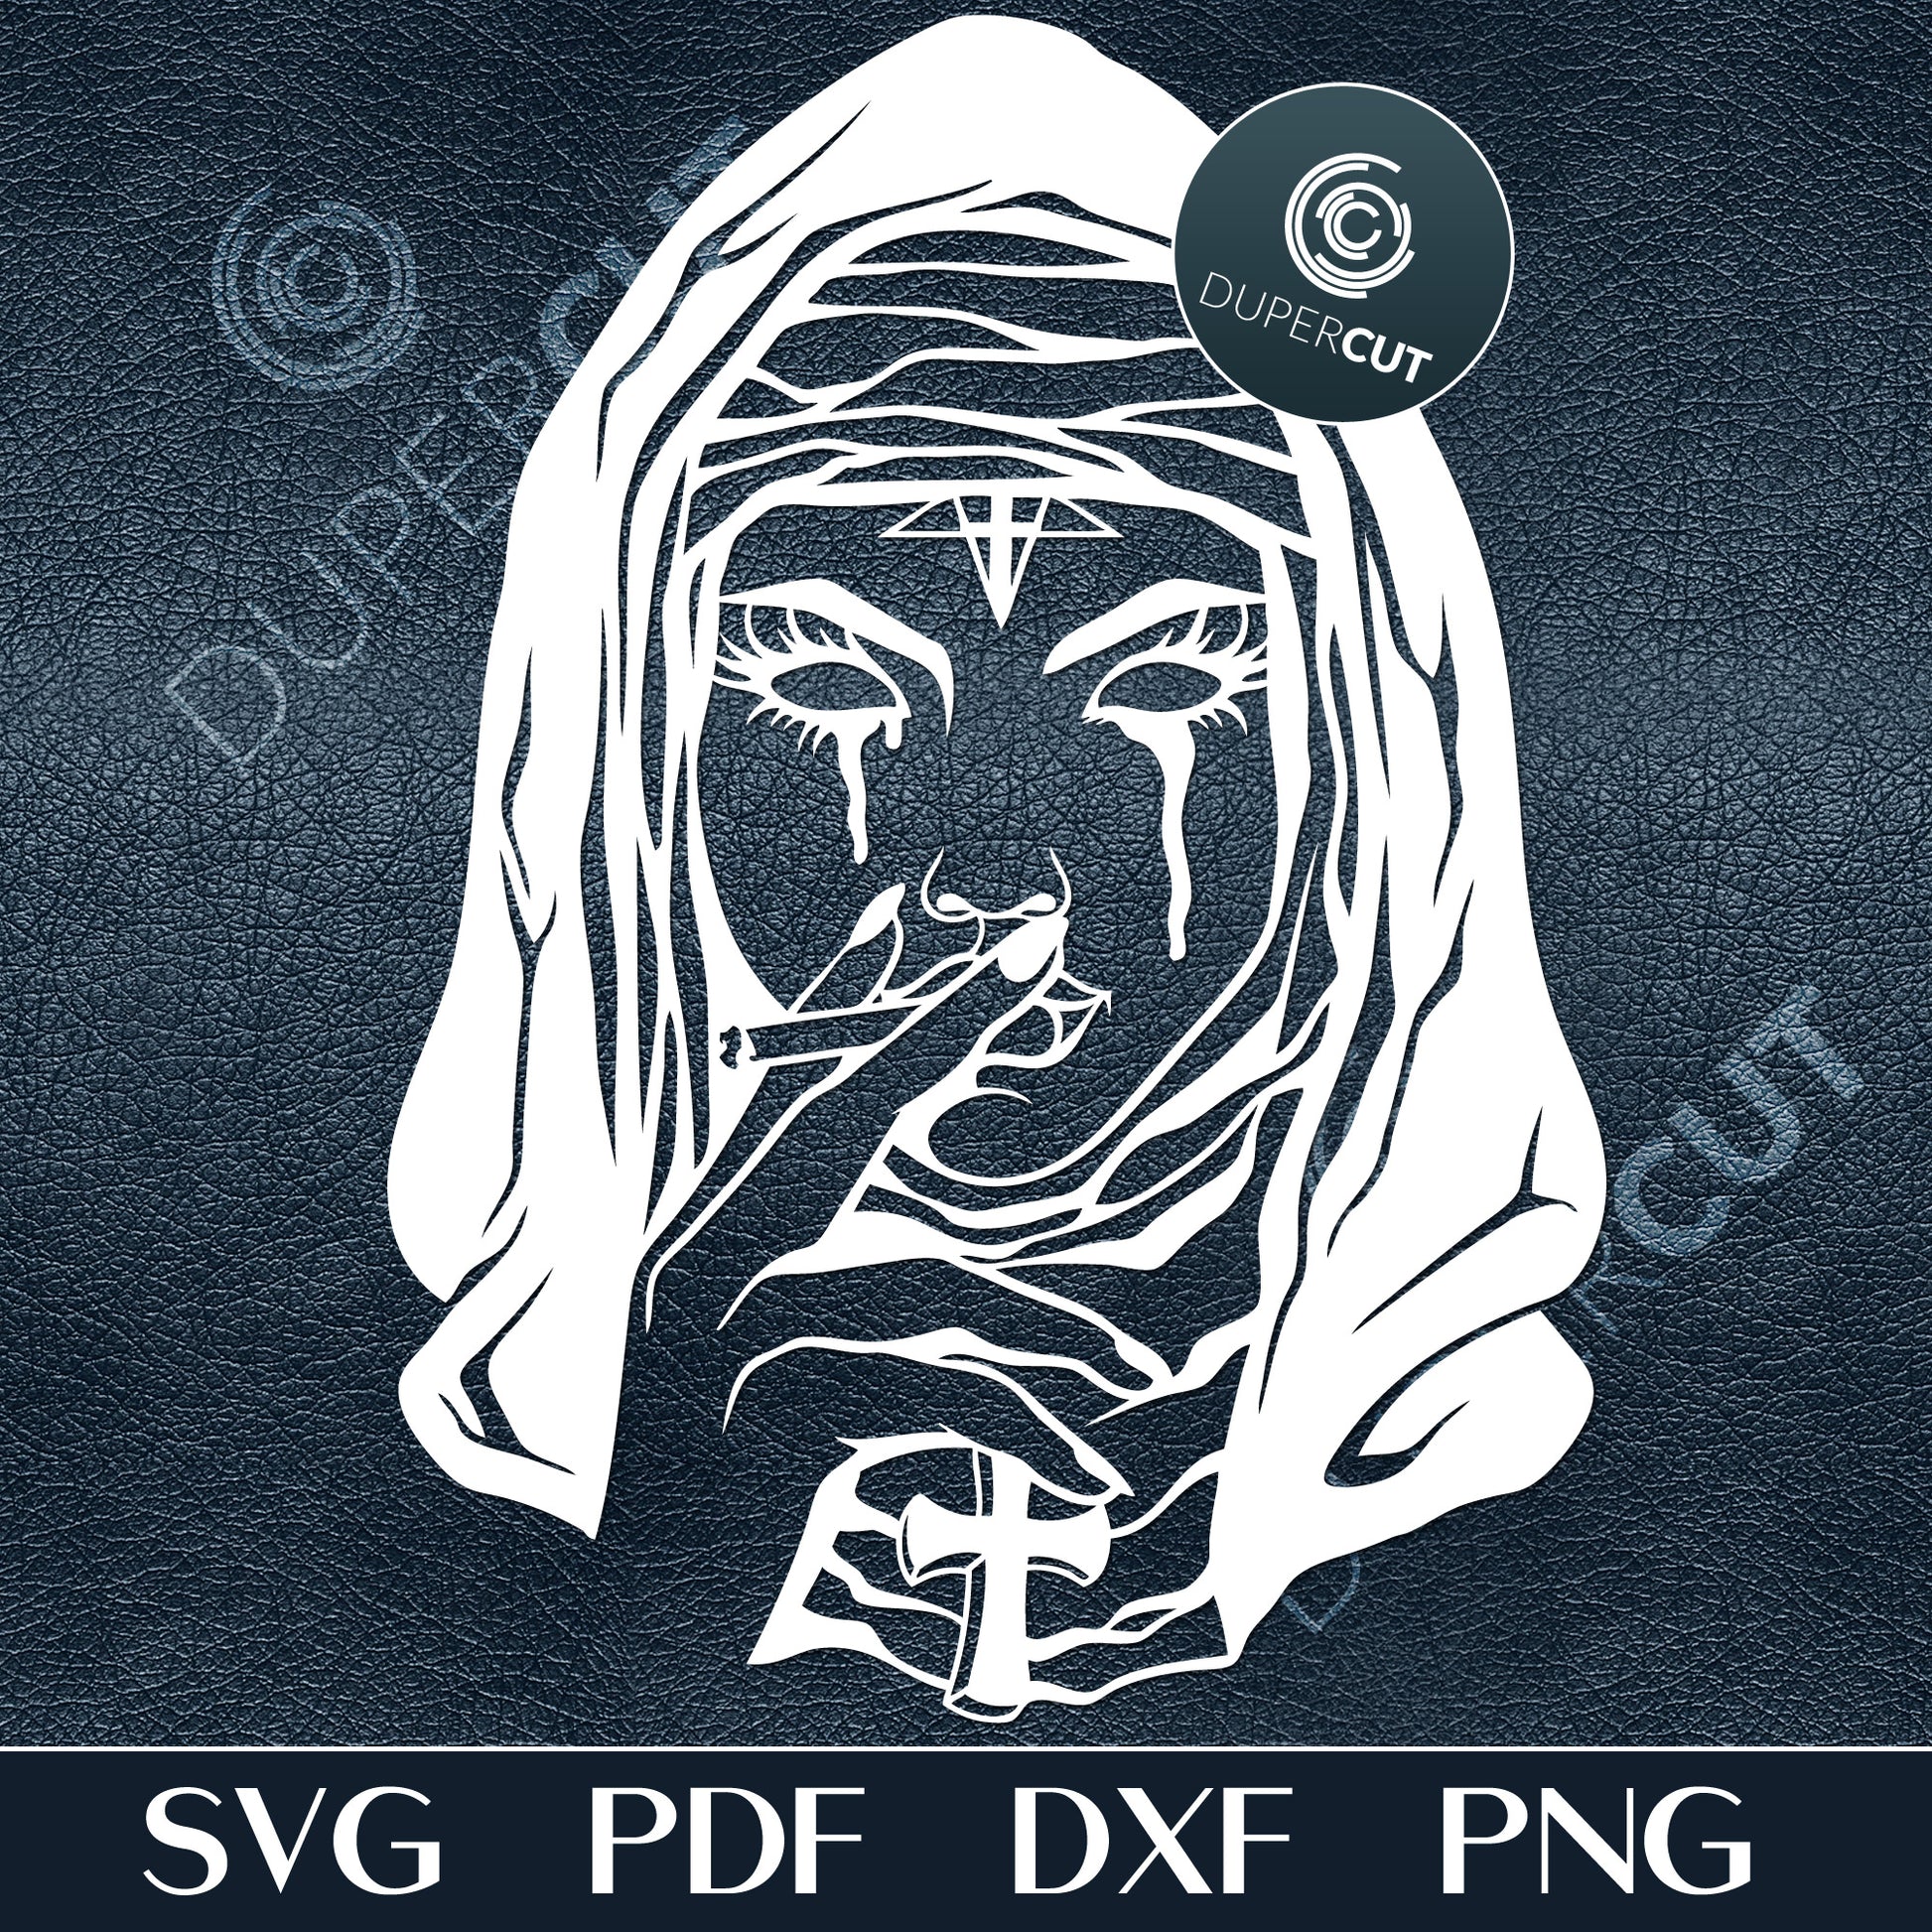 Sinful Nun line drawing, SVG PNG DXF cutting files, for print on demand, sublimation, vinyl, commercial use